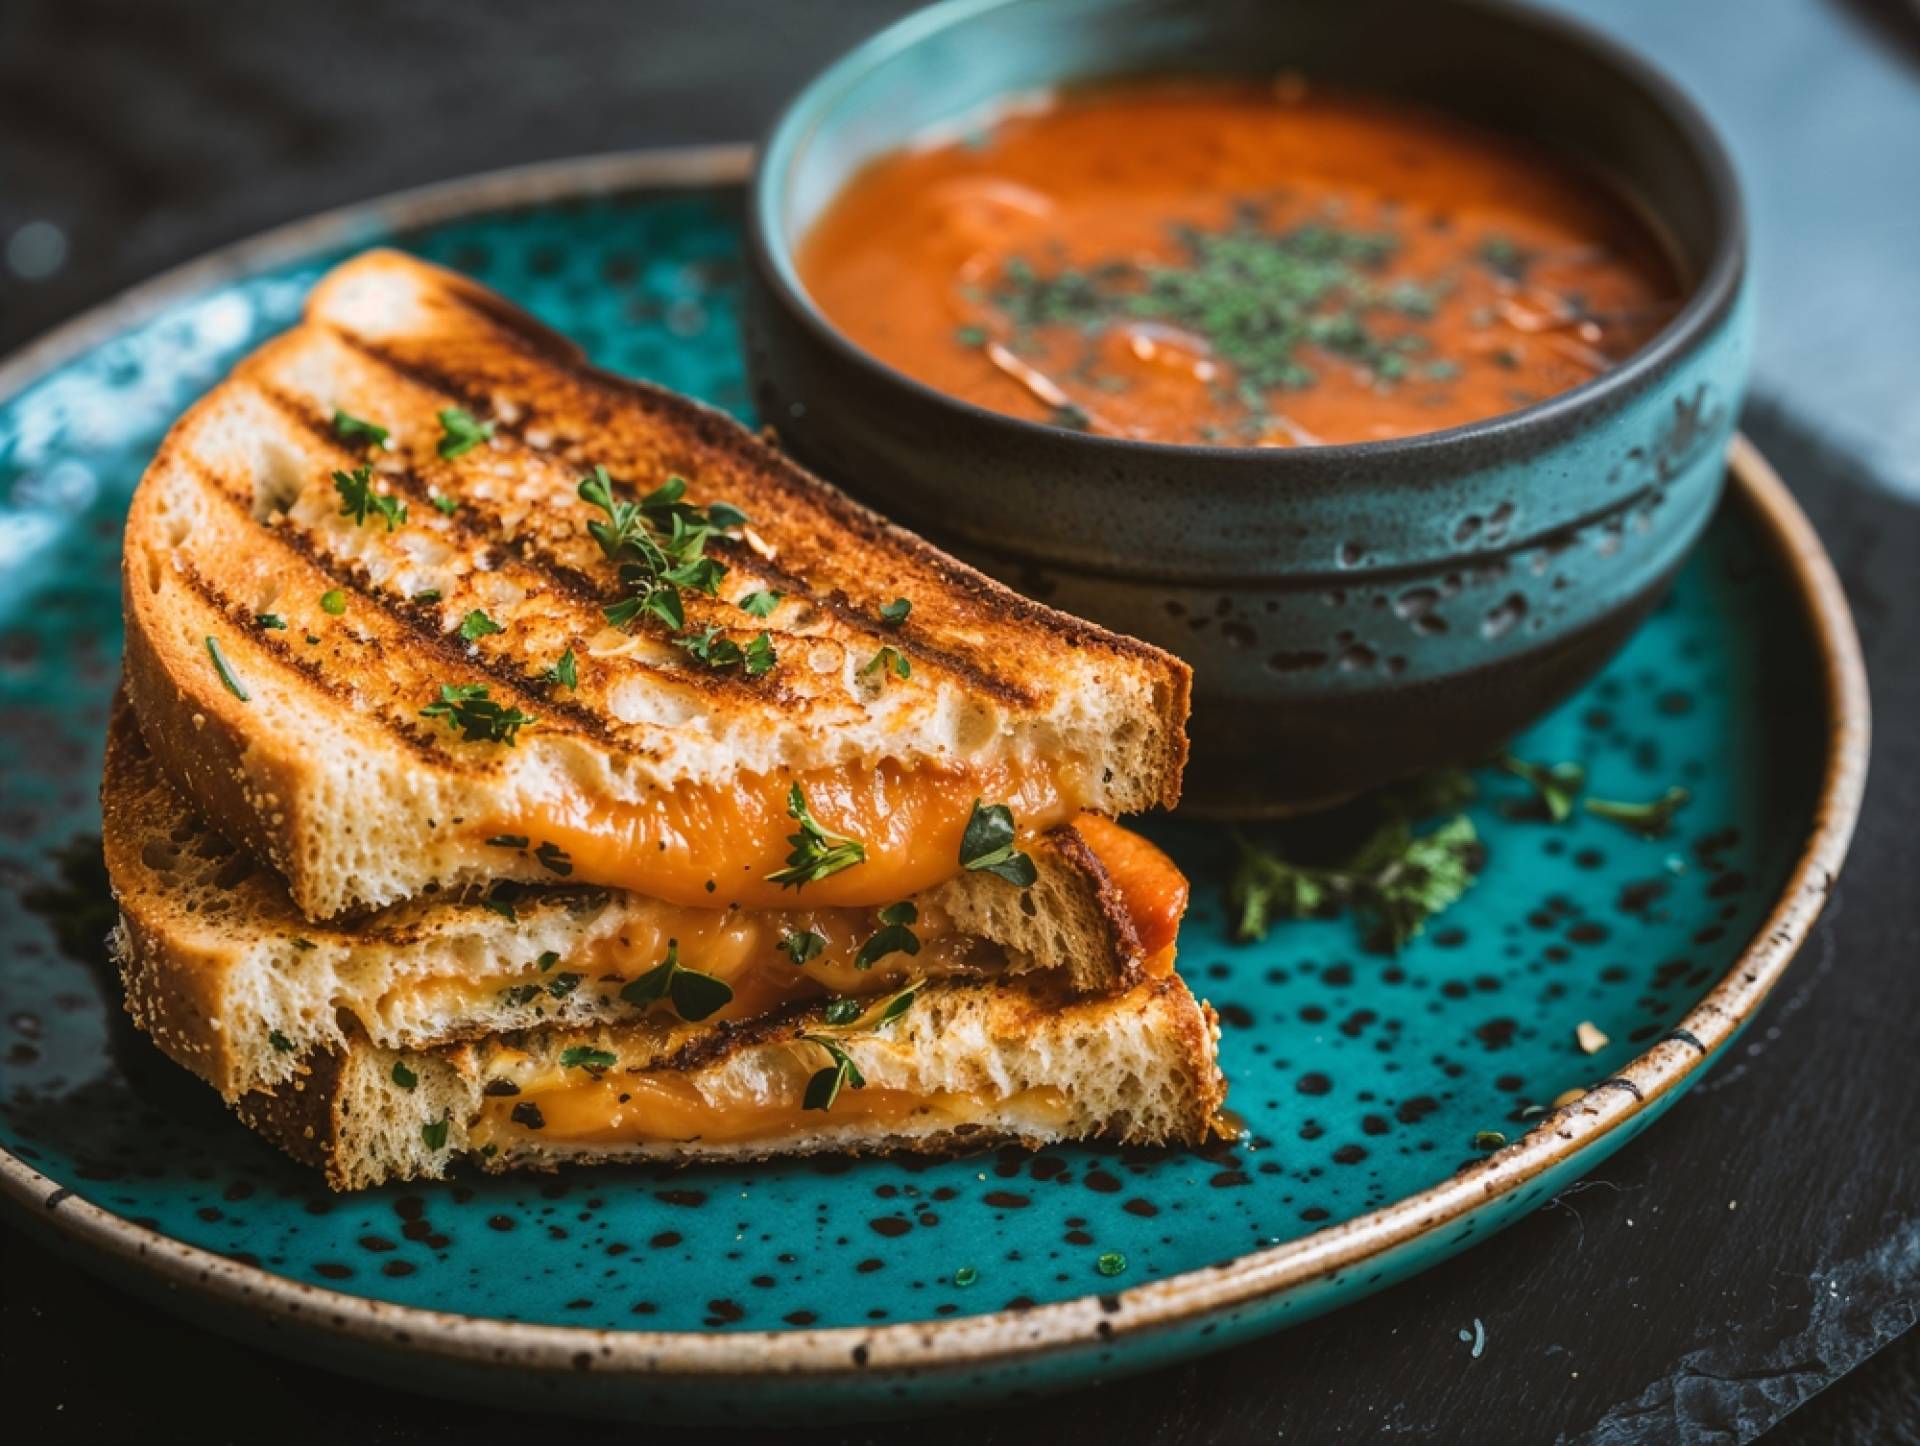 Grilled Chicken & Summer Vegetable Panini with Tomato soup